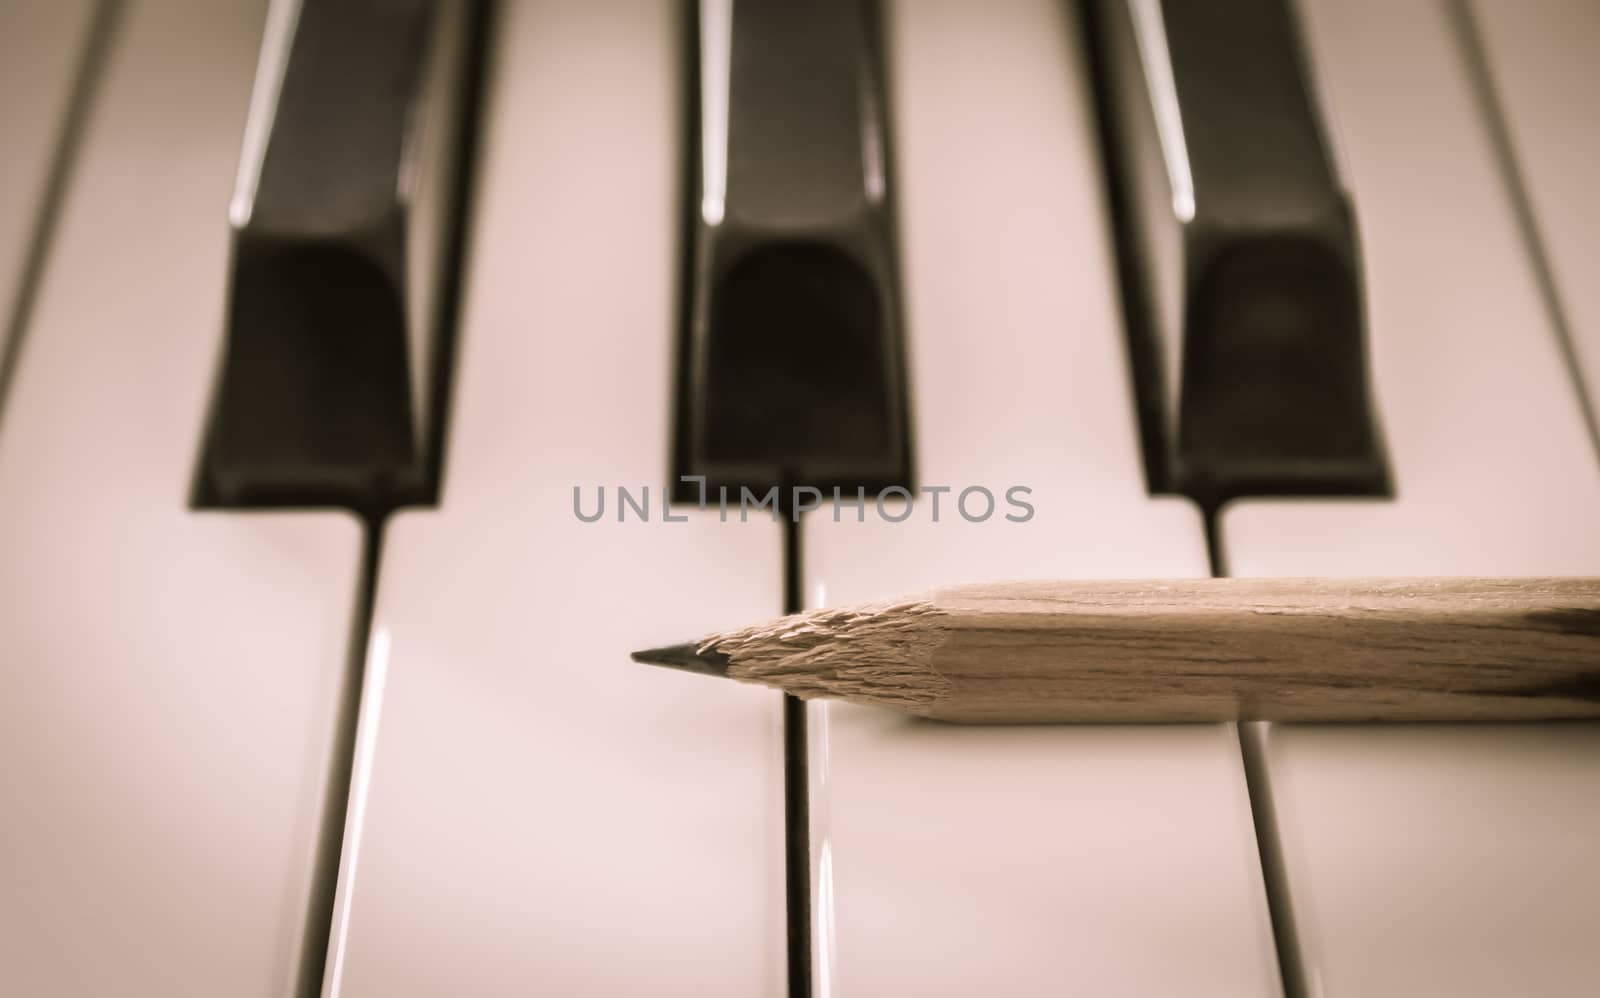 Old Pencil on White Keys of Electric Piano in Horizontal View. Concept about Piano Playing or Piano Learning